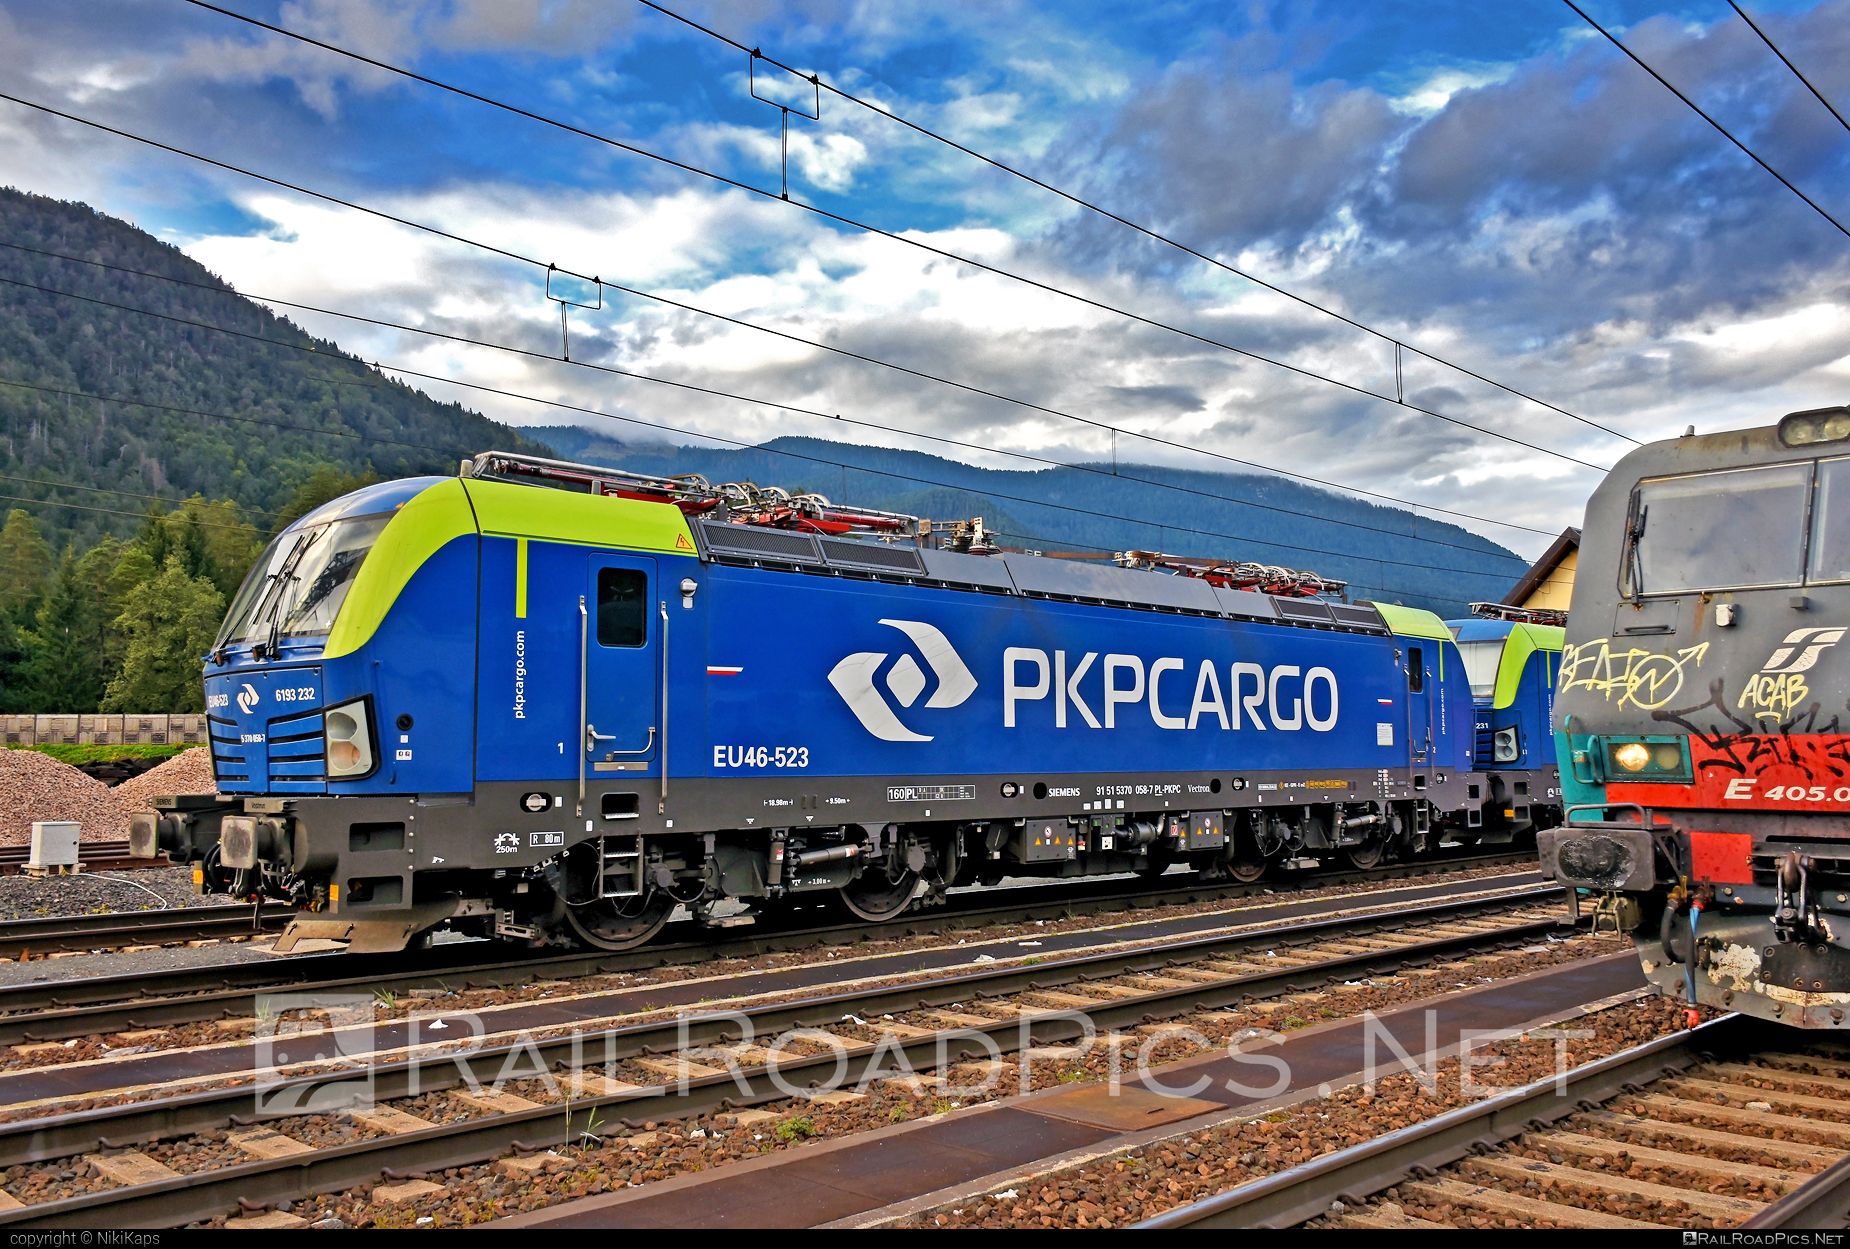 Siemens Vectron MS - 5 370 058-7 operated by PKP CARGO Spólka Akcyjna #pkp #pkpcargo #pkpcargospolkaakcyjna #siemens #siemensVectron #siemensVectronMS #vectron #vectronMS